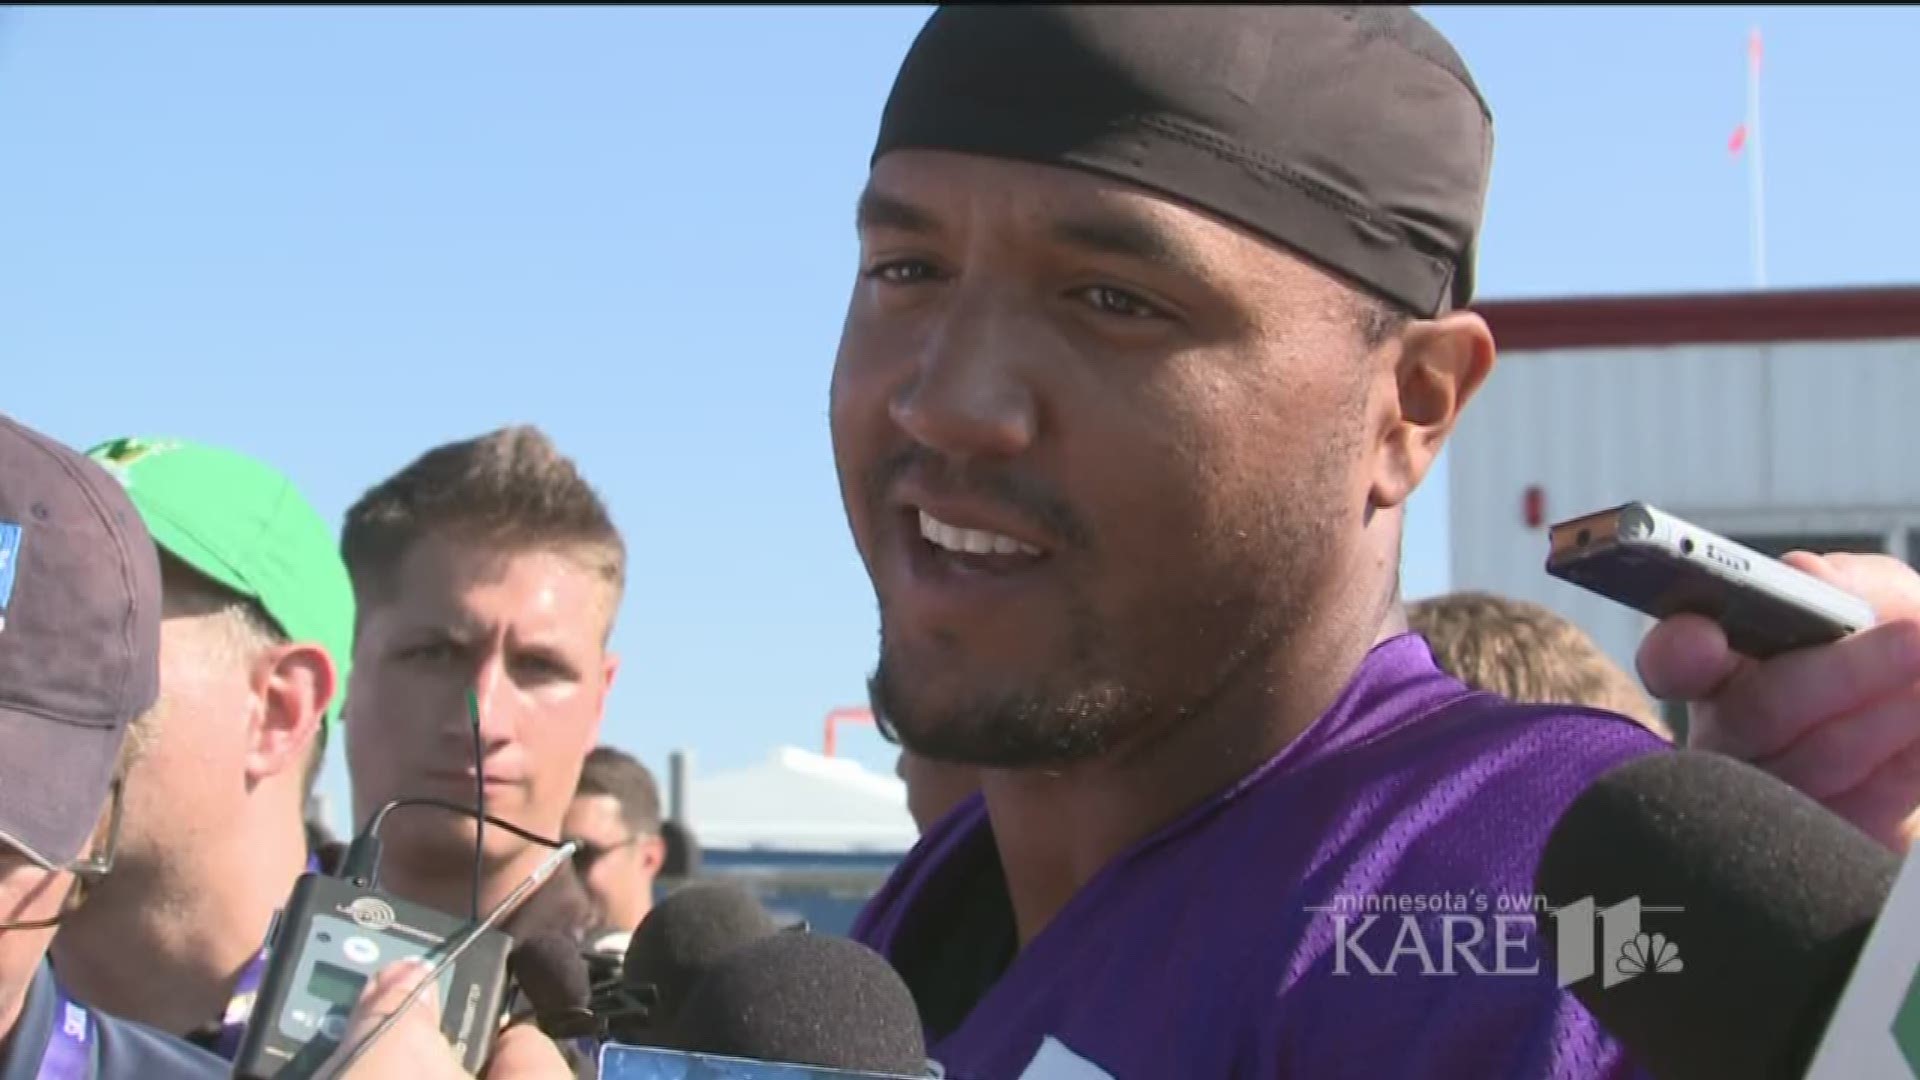 At Minnesota State University in Mankato, where wide receiver Adam Thielen used to play, the Vikings also have Isaac Fruechte from Caledonia running routes, and then there's Michael Floyd, a third in state product at wide receiver. http://kare11.tv/2u24c5